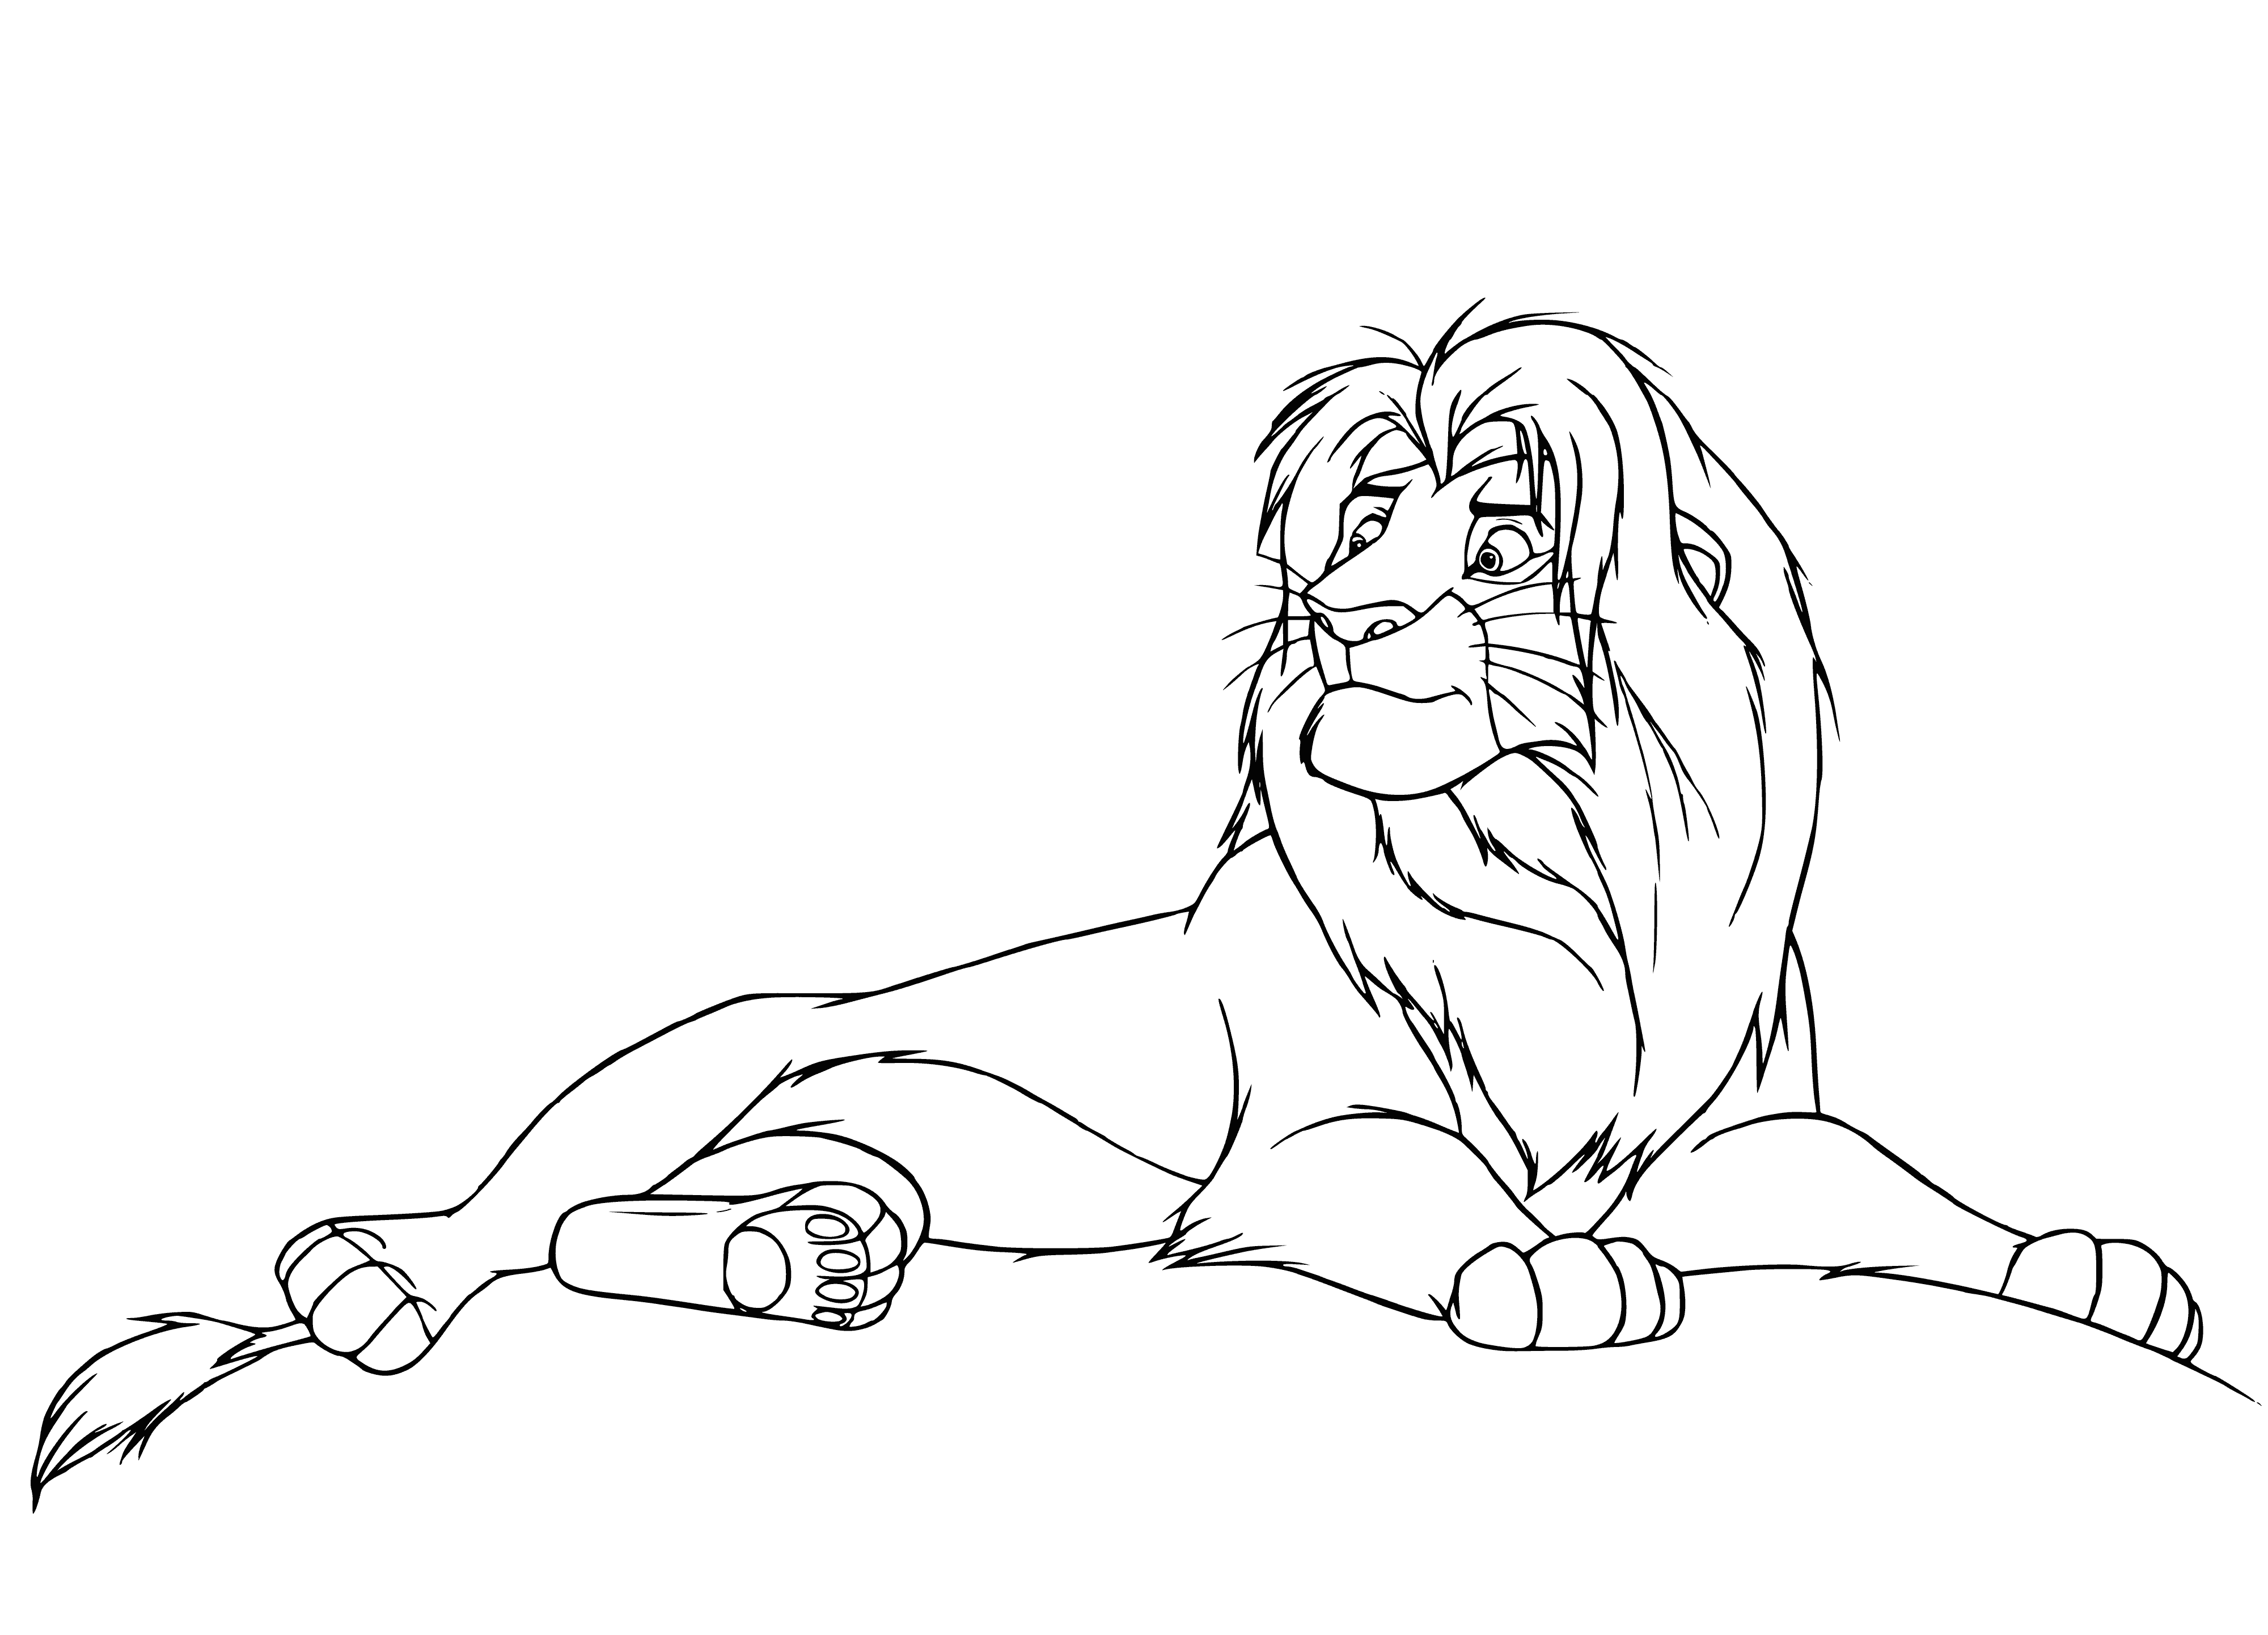 coloring page: Powerful lion stands on rocky outcropping, ready to take on challenges with confident, intense gaze.